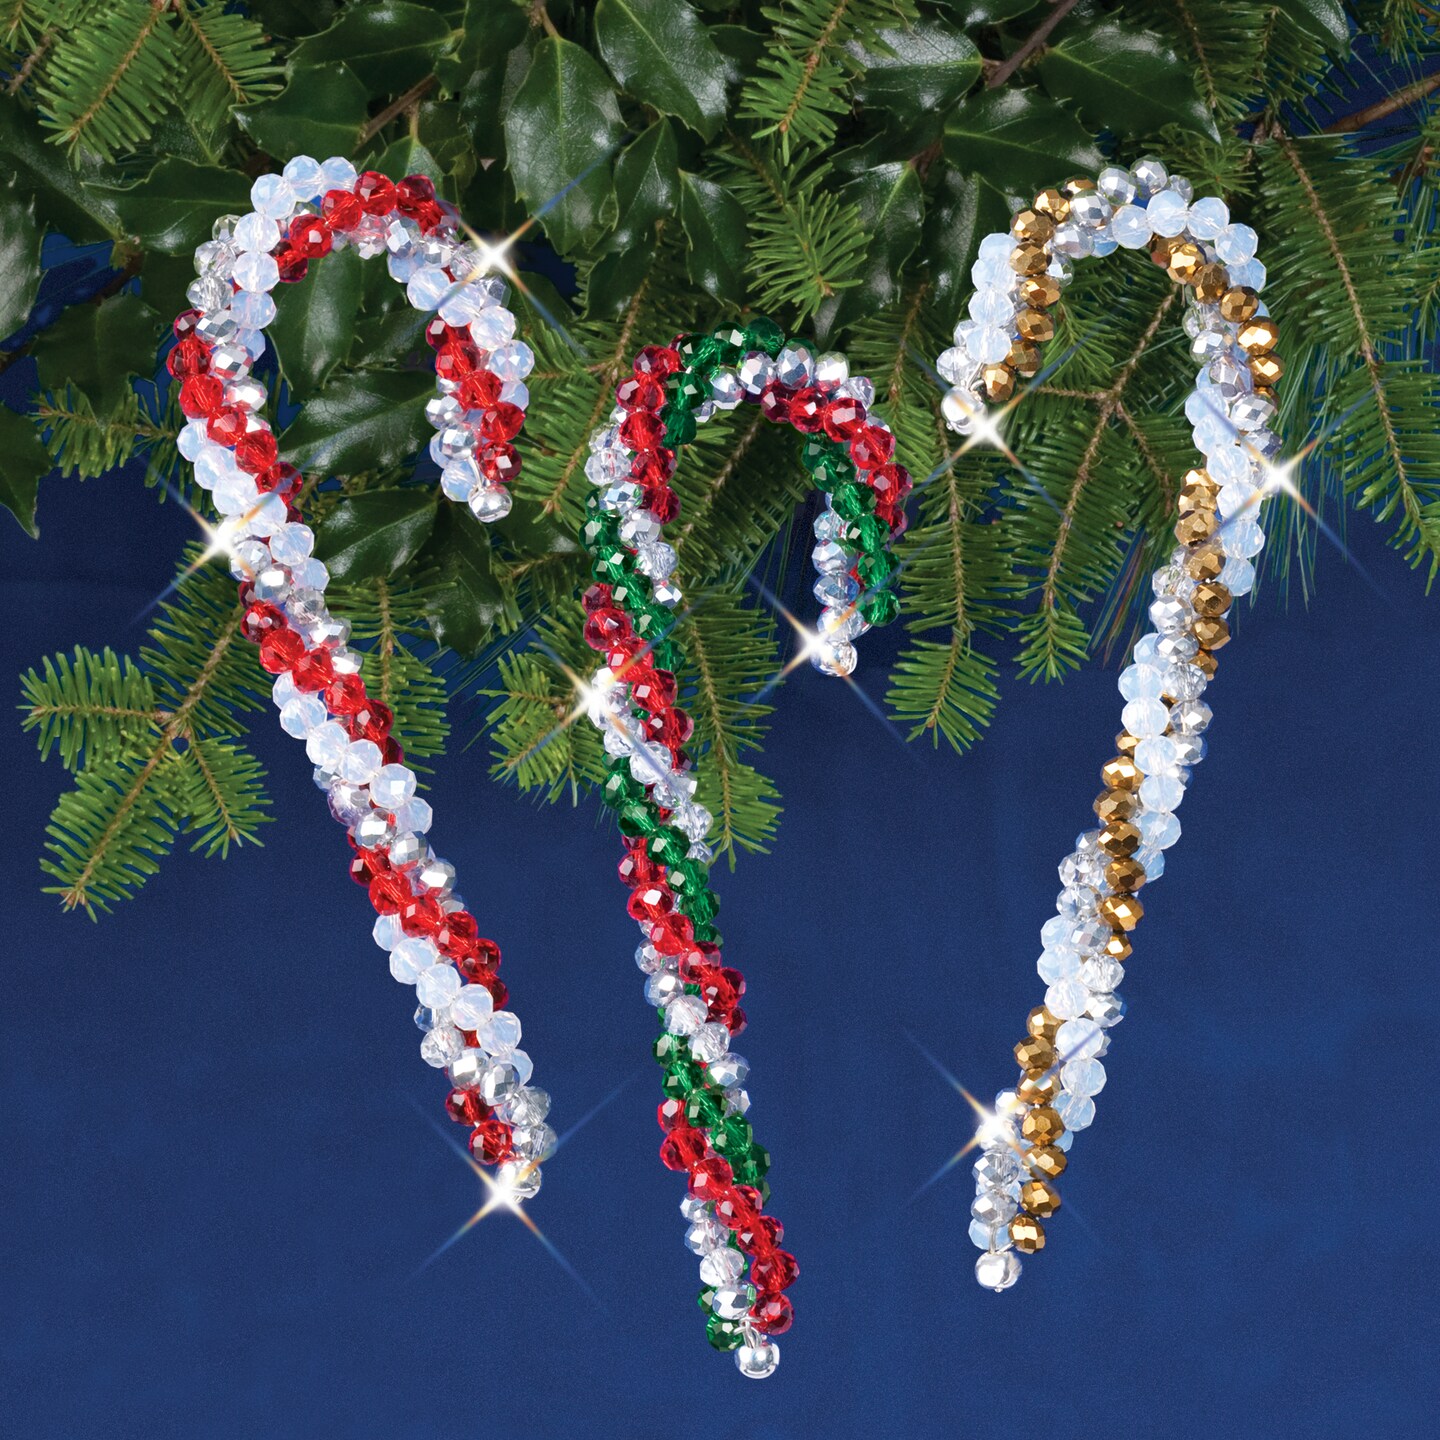 Solid Oak Nostalgic Christmas Beaded Crystal Ornament Kit-Crystal Candy Canes Makes 3